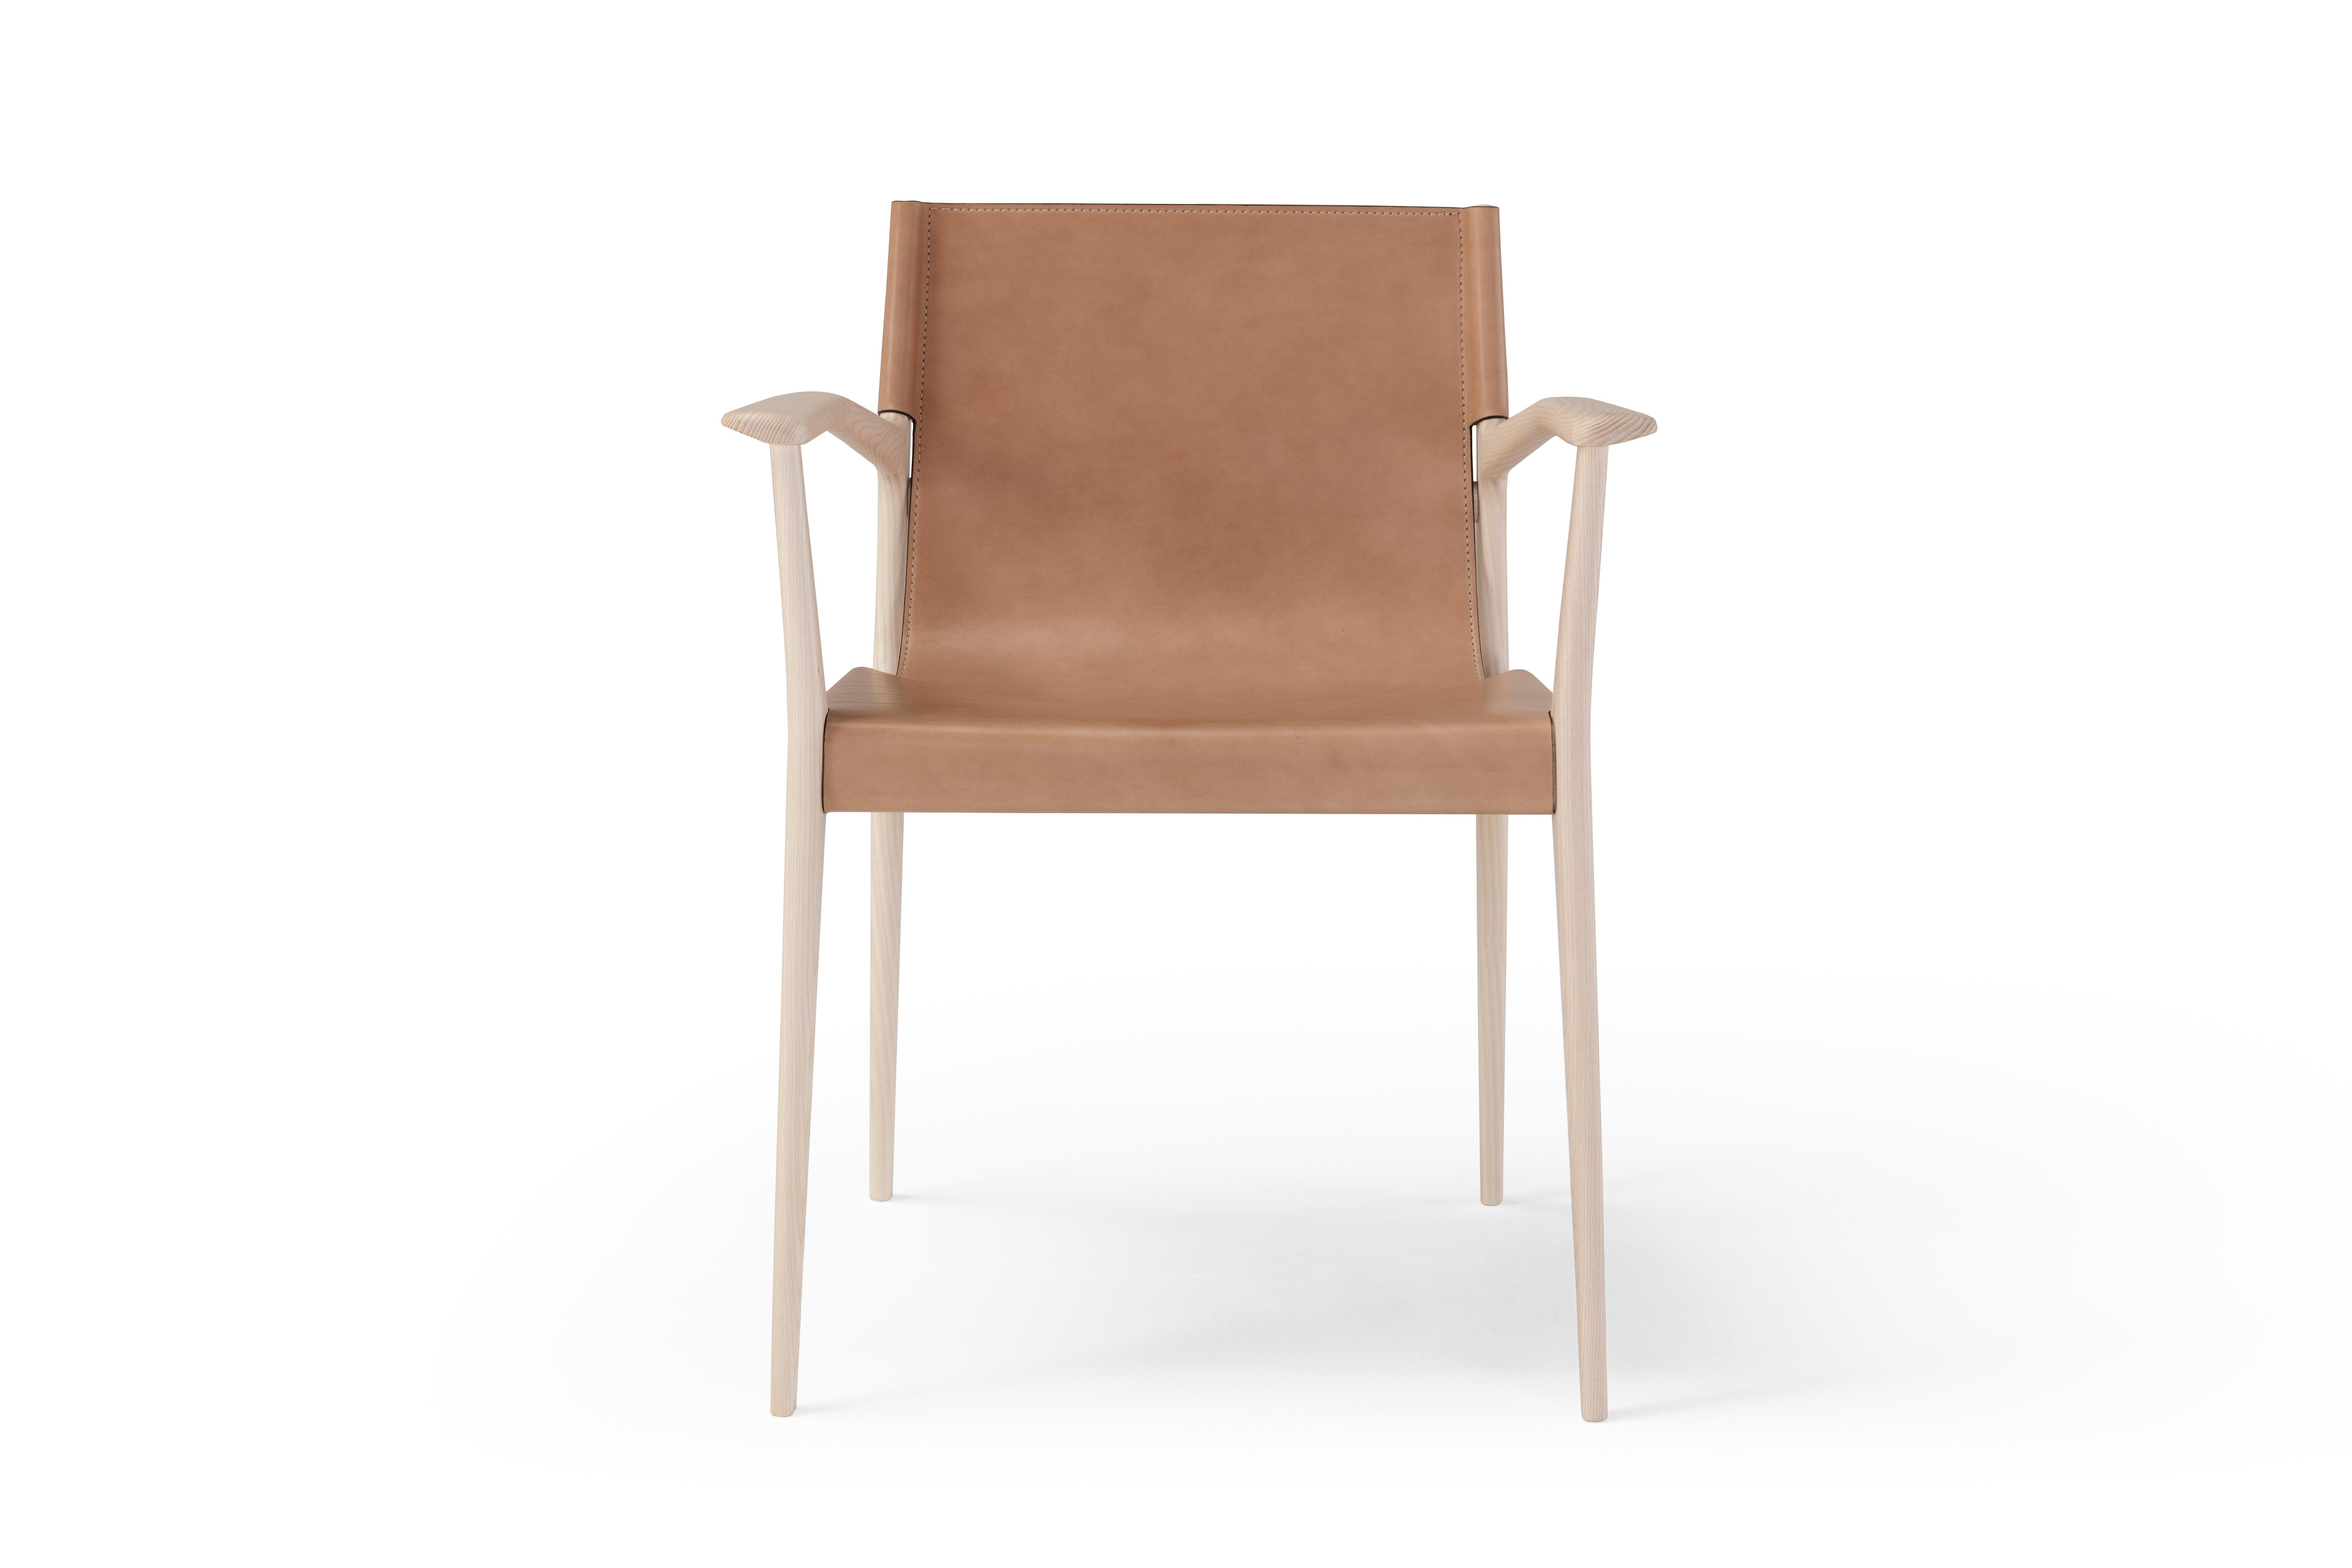 TESSA solid wood and cuoio chair, already from its name, it reminds the ability to blend and weave together fluidity, lightness and materiality. The wooden structure is sinuous and slender, but strong and stable at the same time, thanks to the